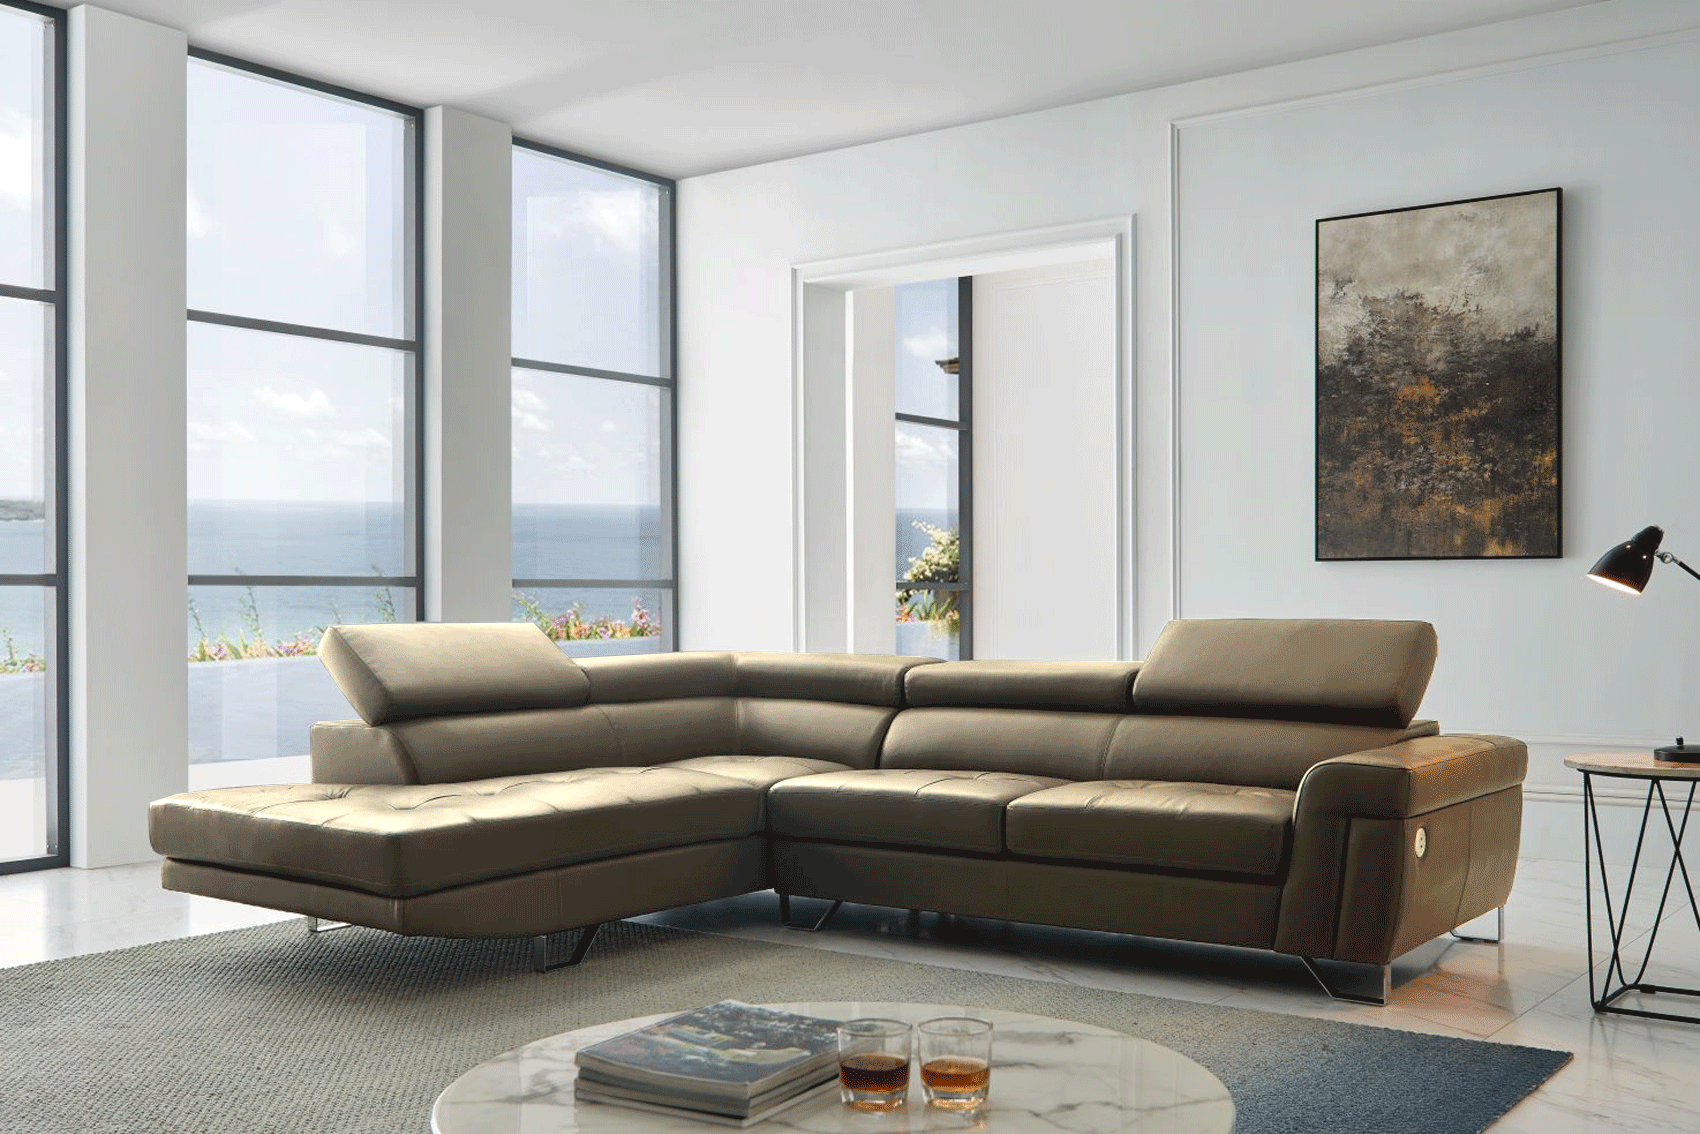 Living Room Furniture Sleepers Sofas Loveseats and Chairs 1807 Sectional Left Taupe